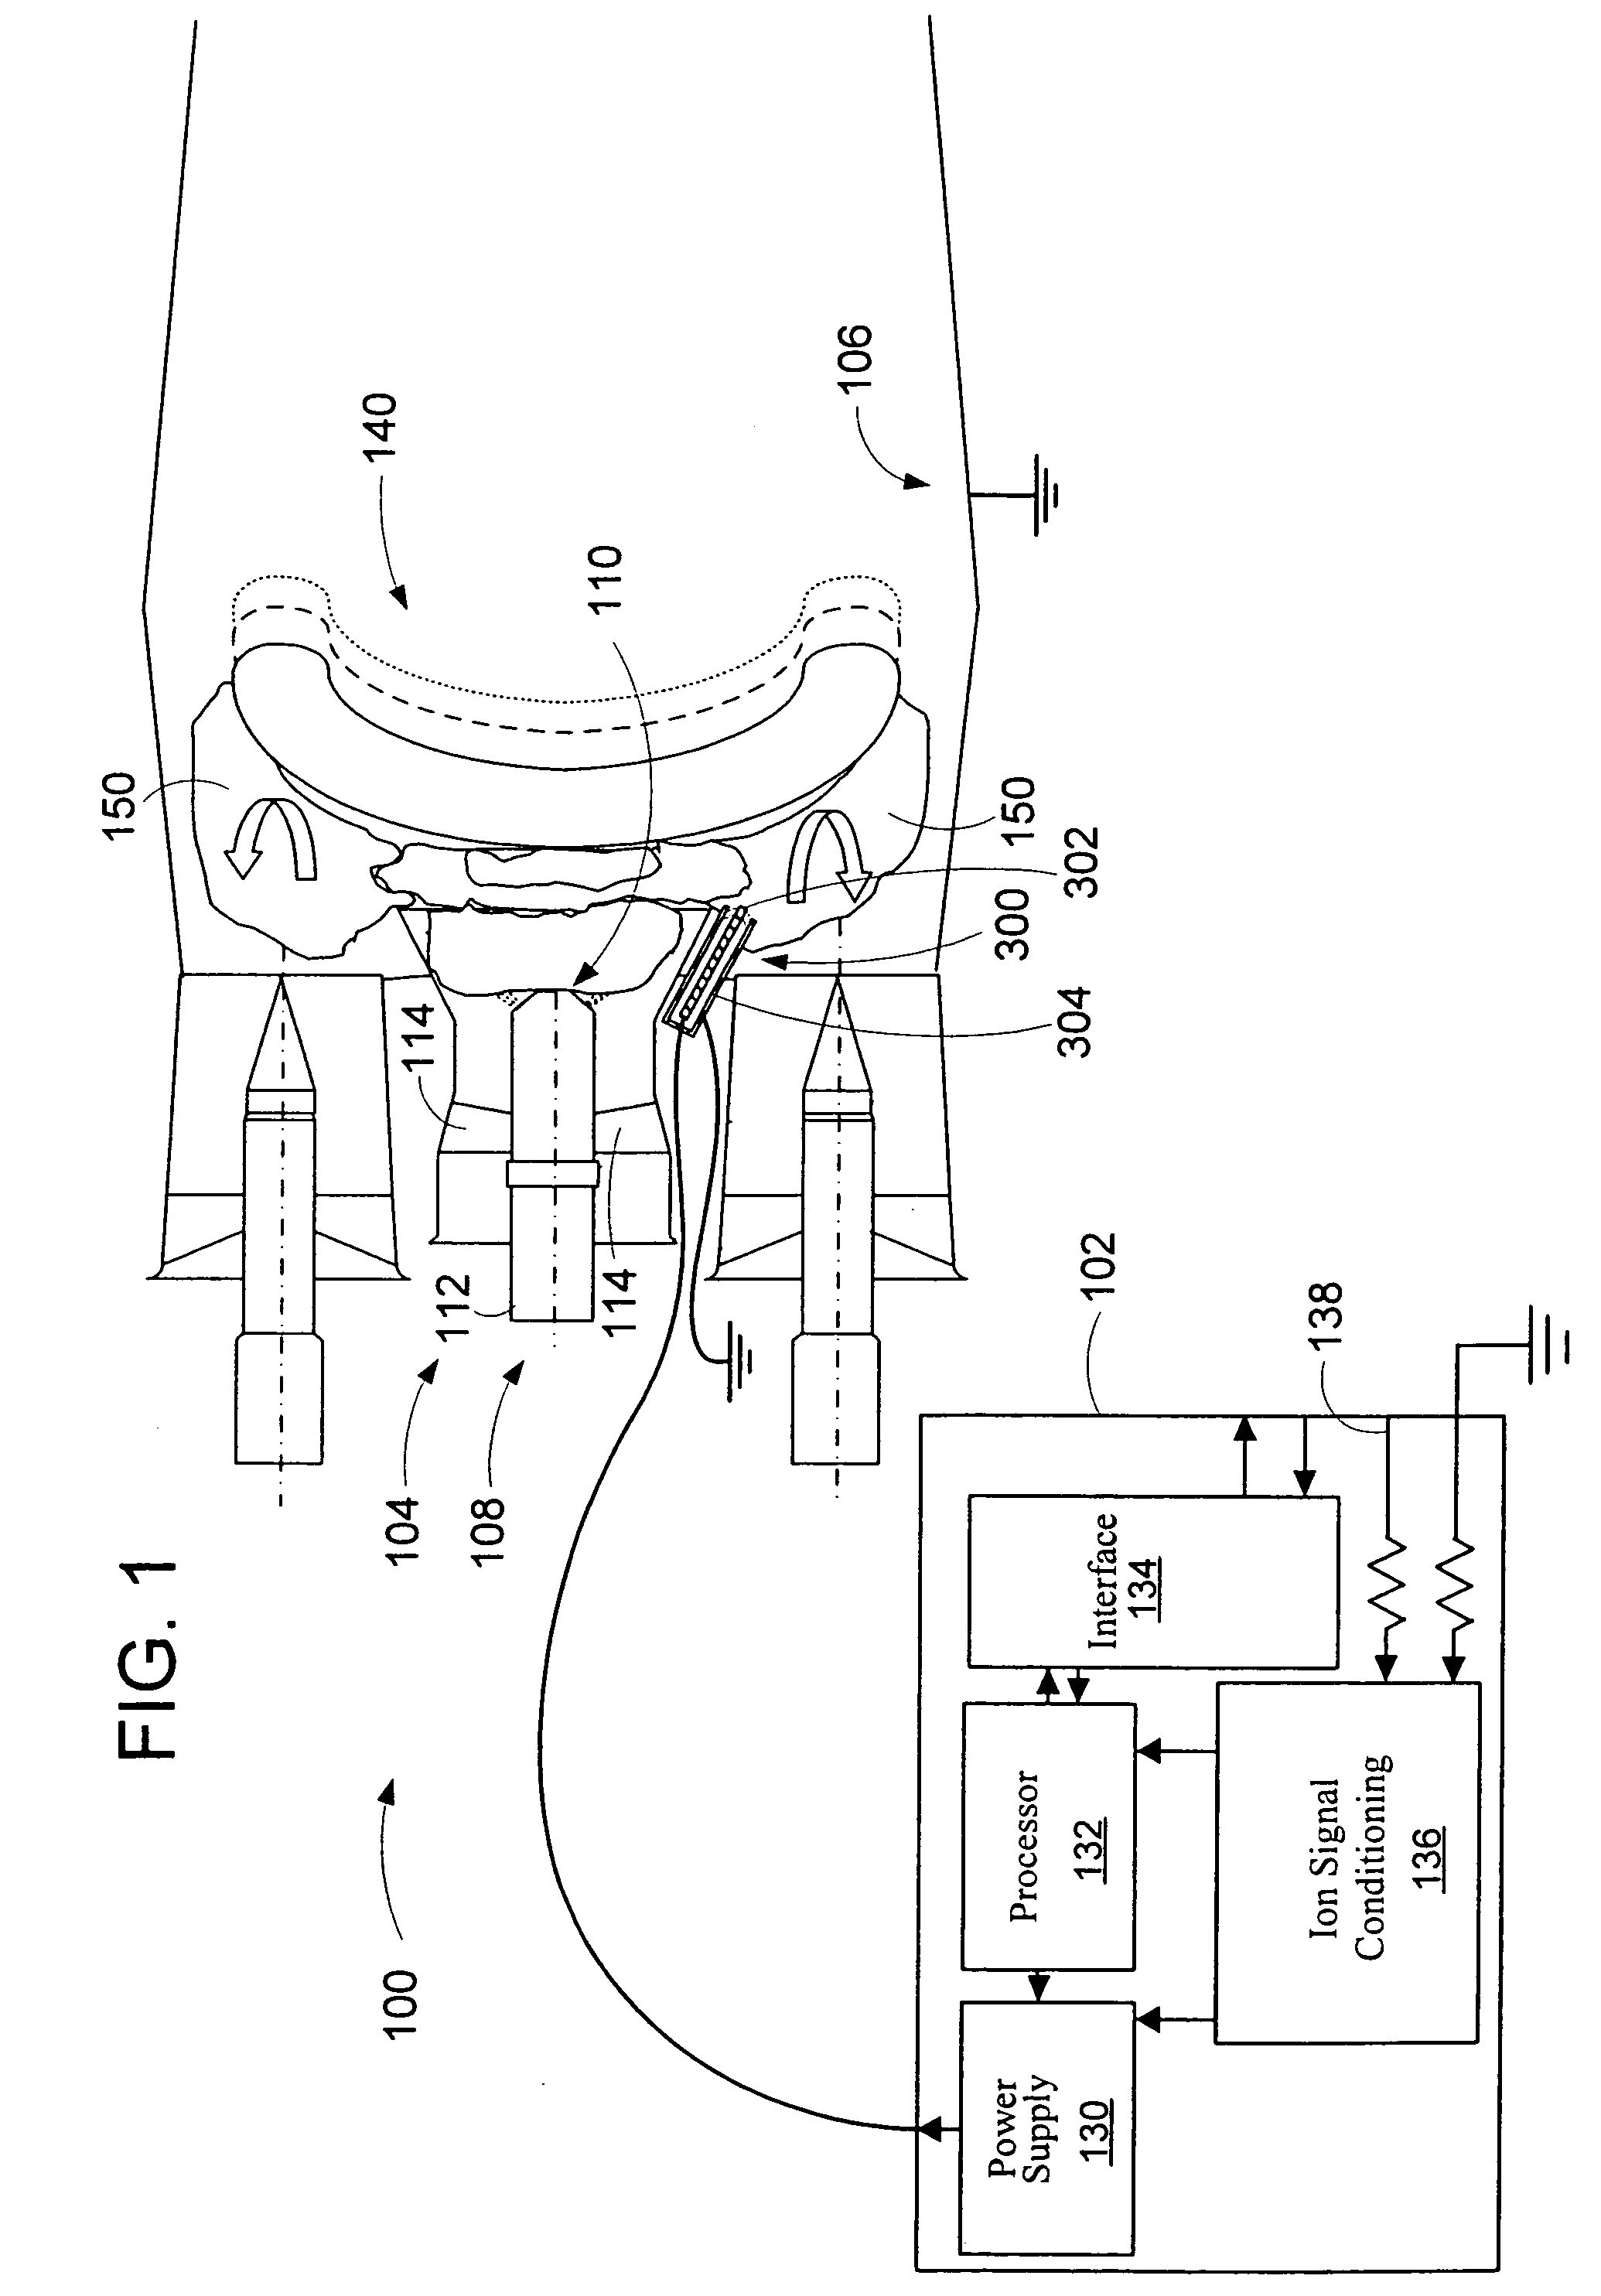 Method and apparatus for detecting combustion instability in continuous combustion systems